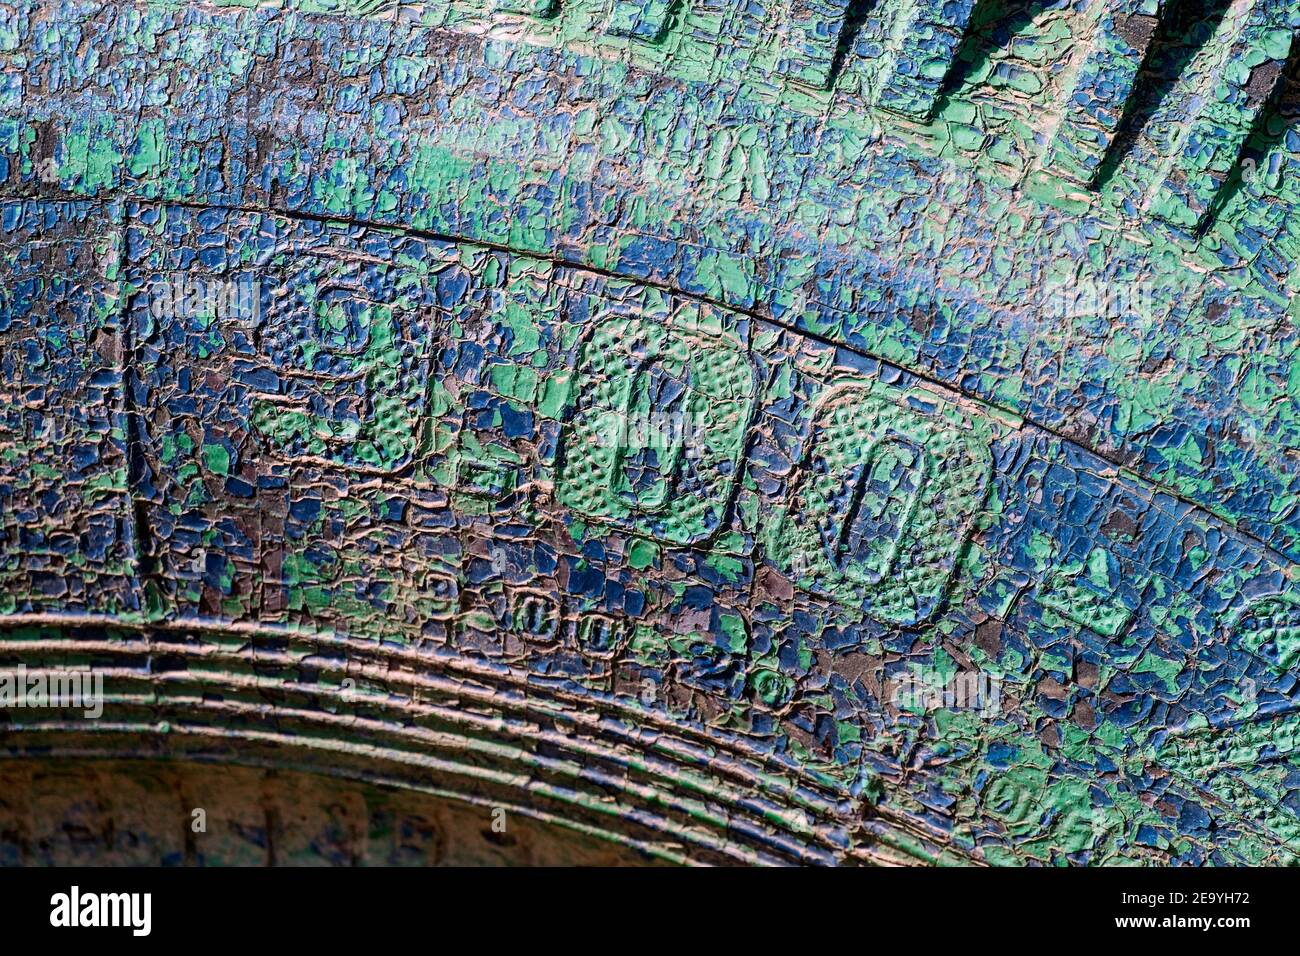 Texture of an old tire with cracked blue-green paint Stock Photo